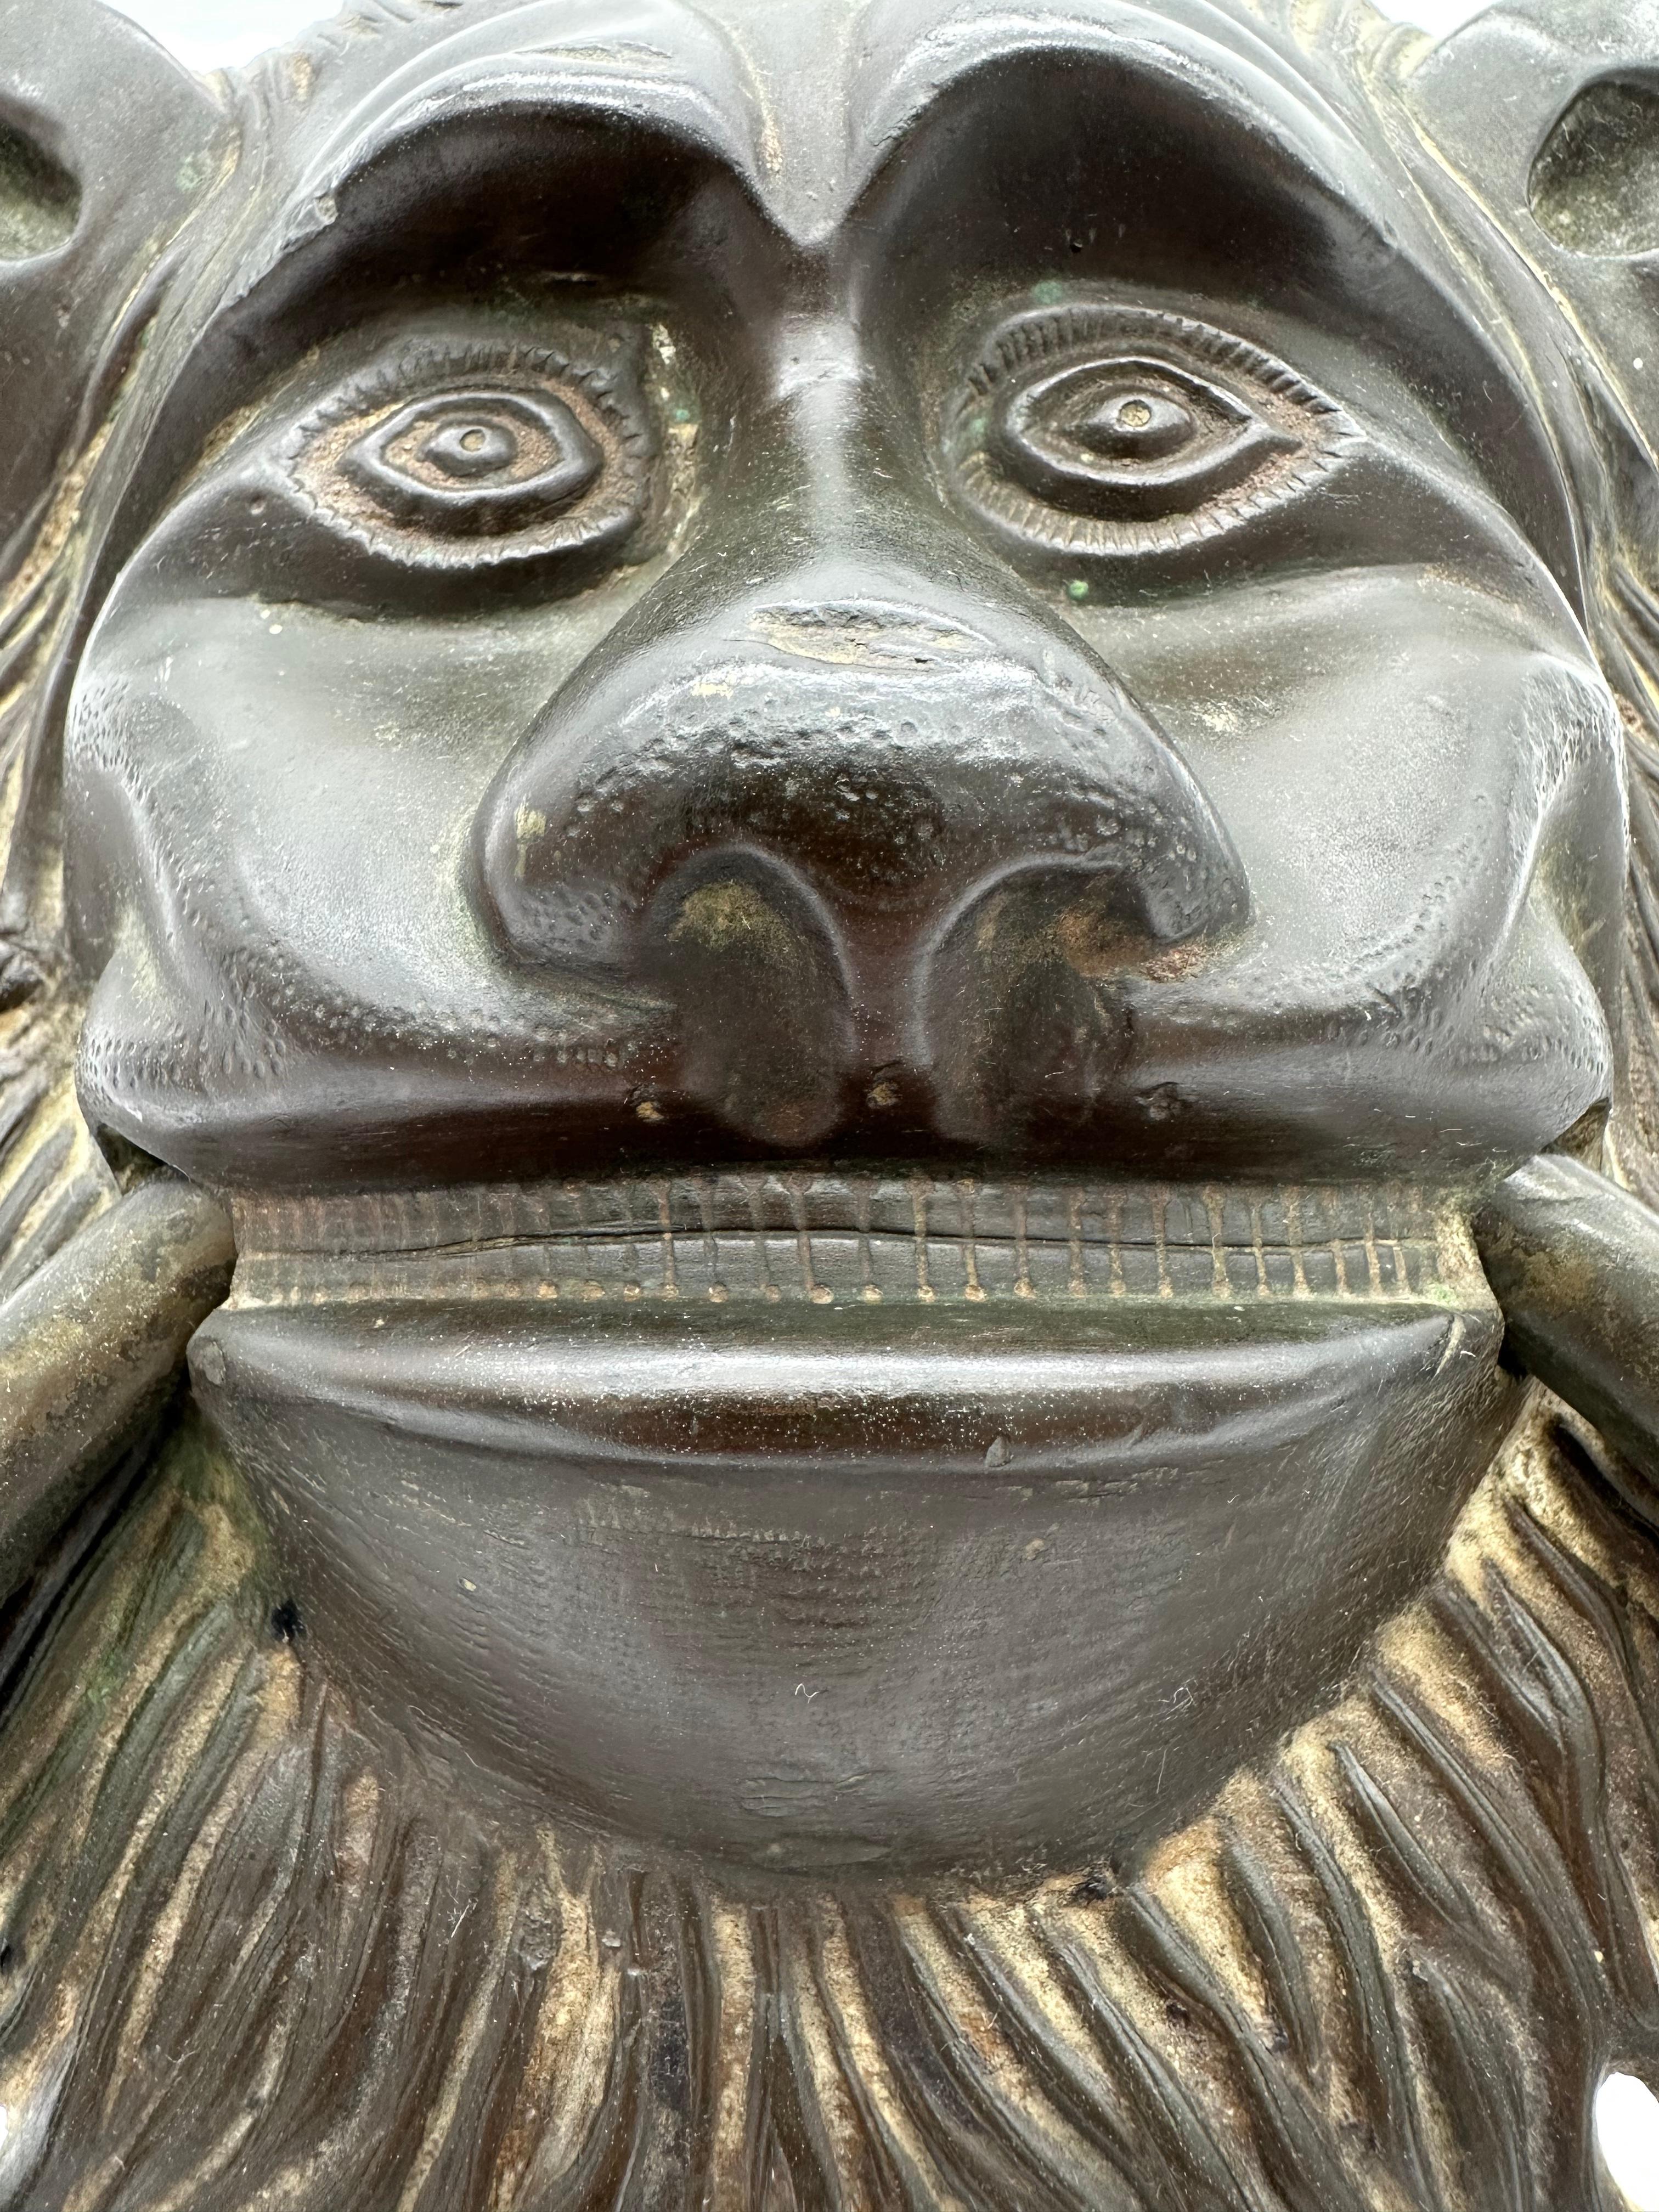 very big and massive bronze door knocker, German or maybe Italian in origin, 16-17th century, amazing green original patina to the face, some scares and dings to the face which gives him a lot more character and can maybe tell us a bit on its